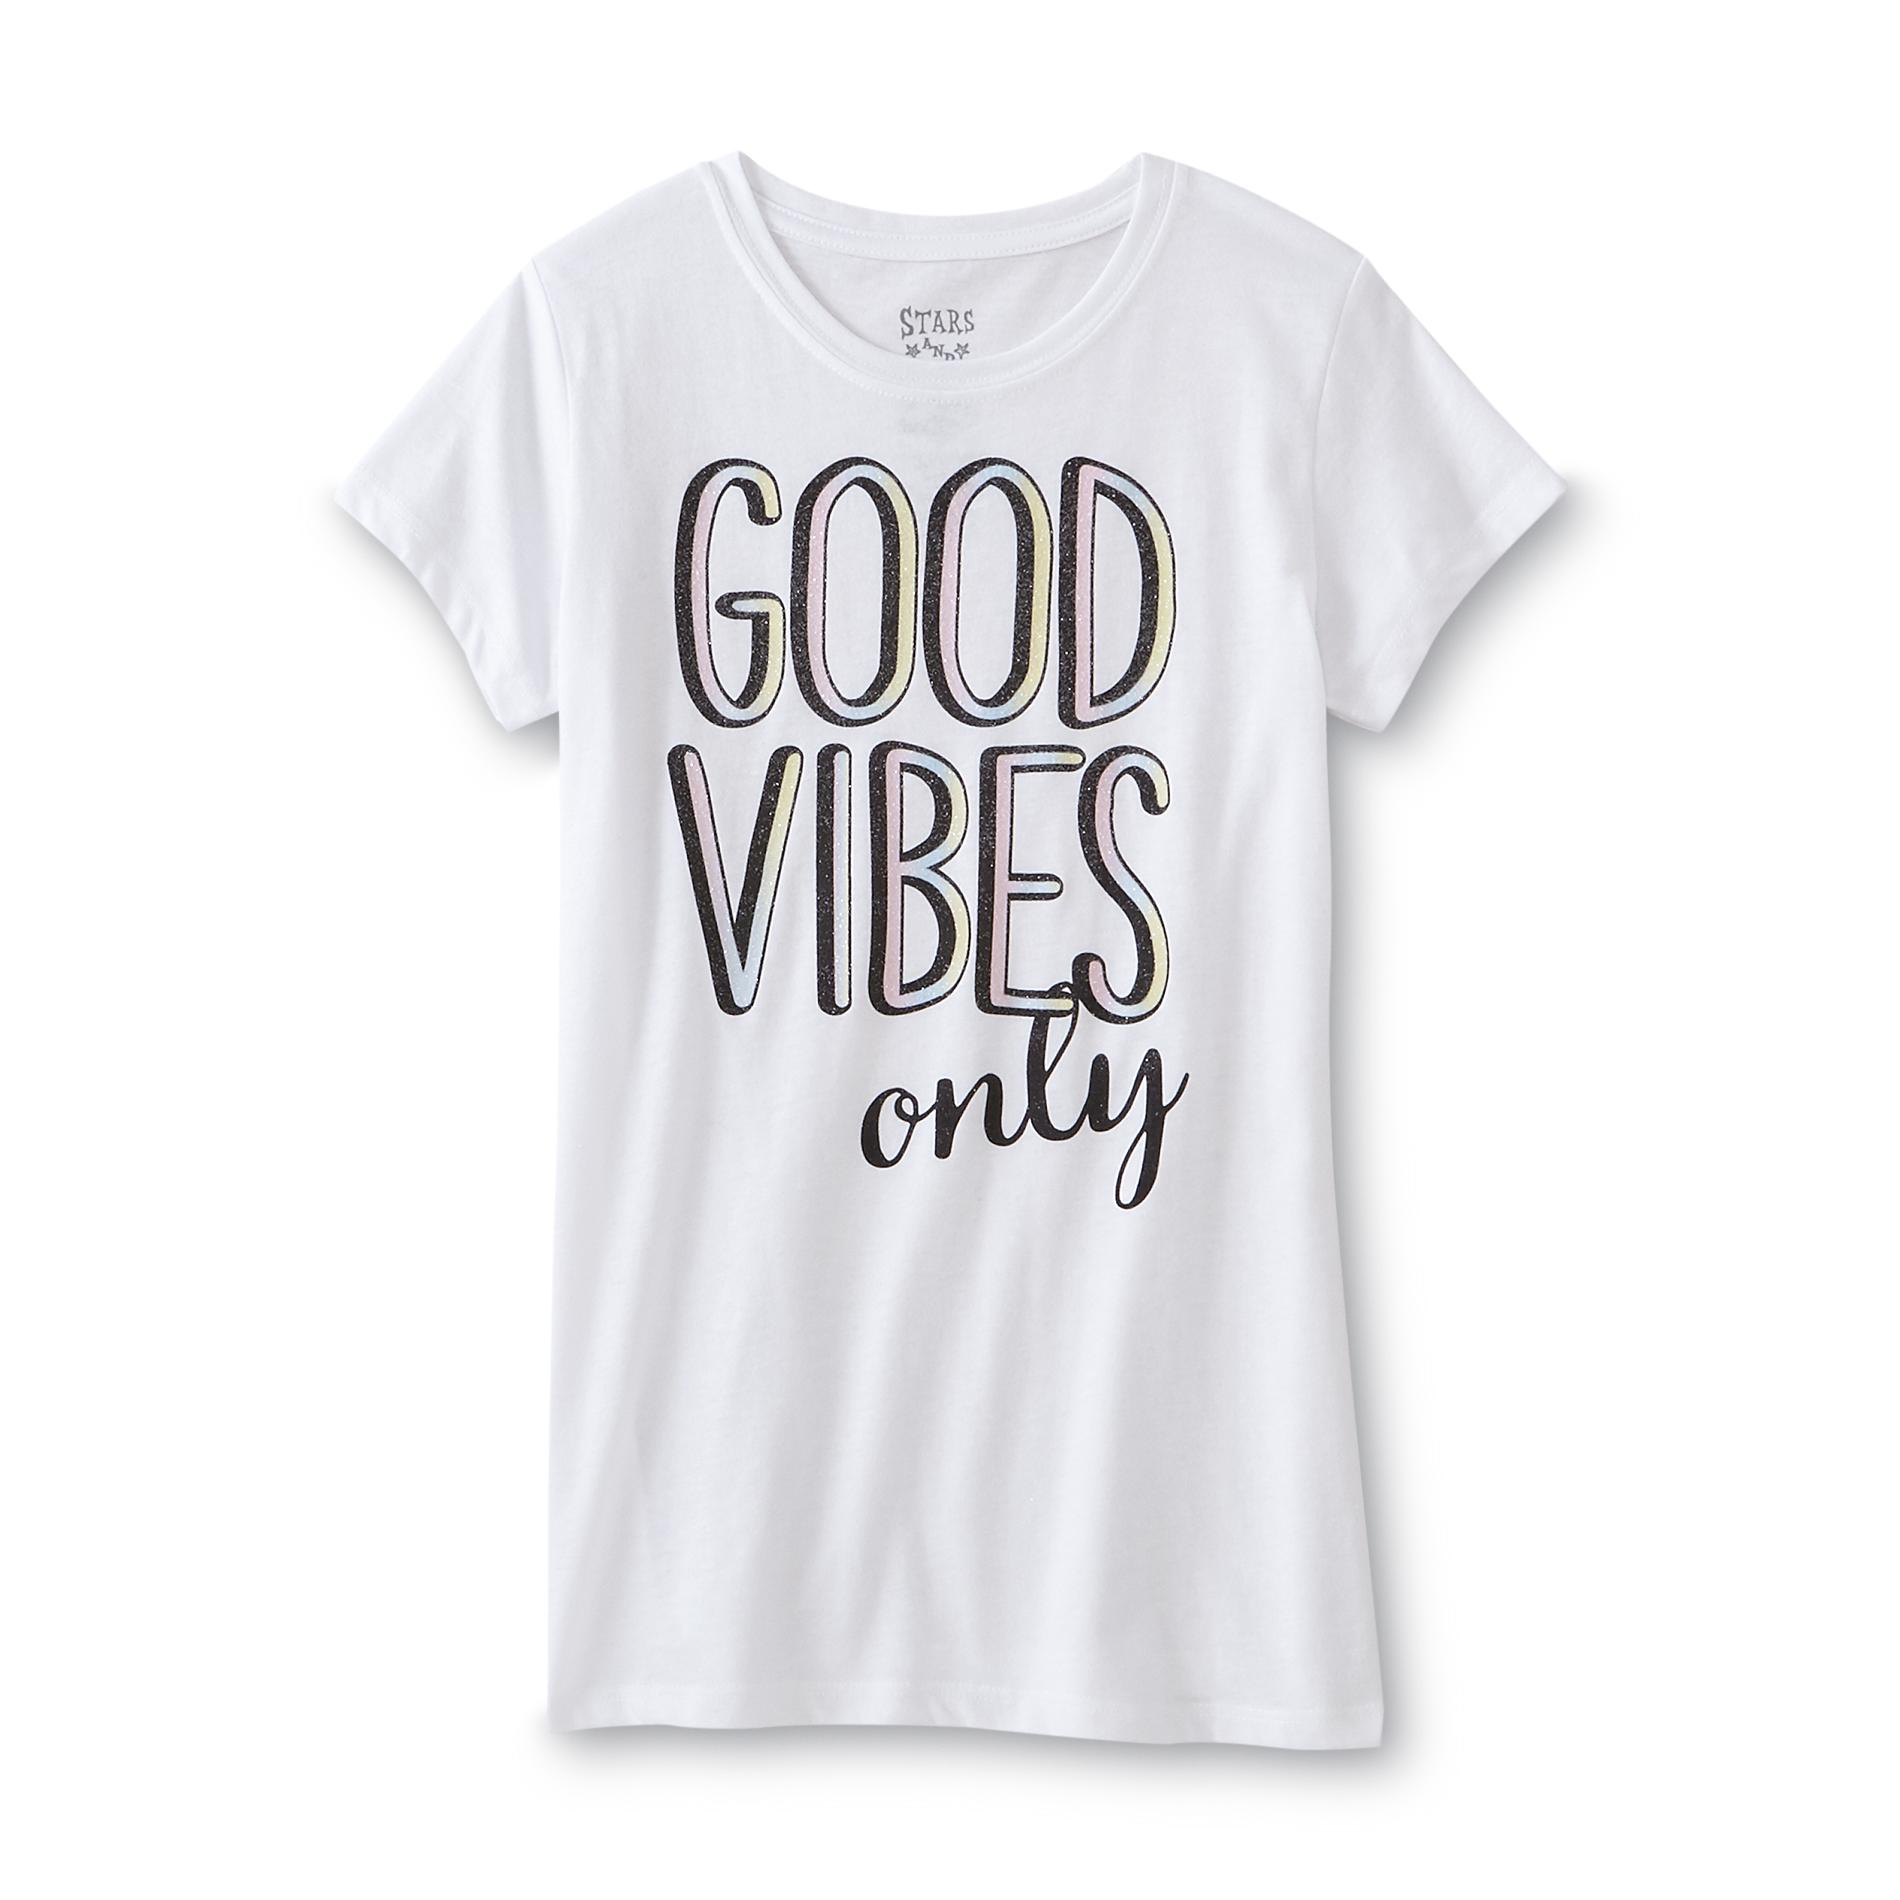 Hybrid Girl's Graphic T-Shirt - Good Vibes Only